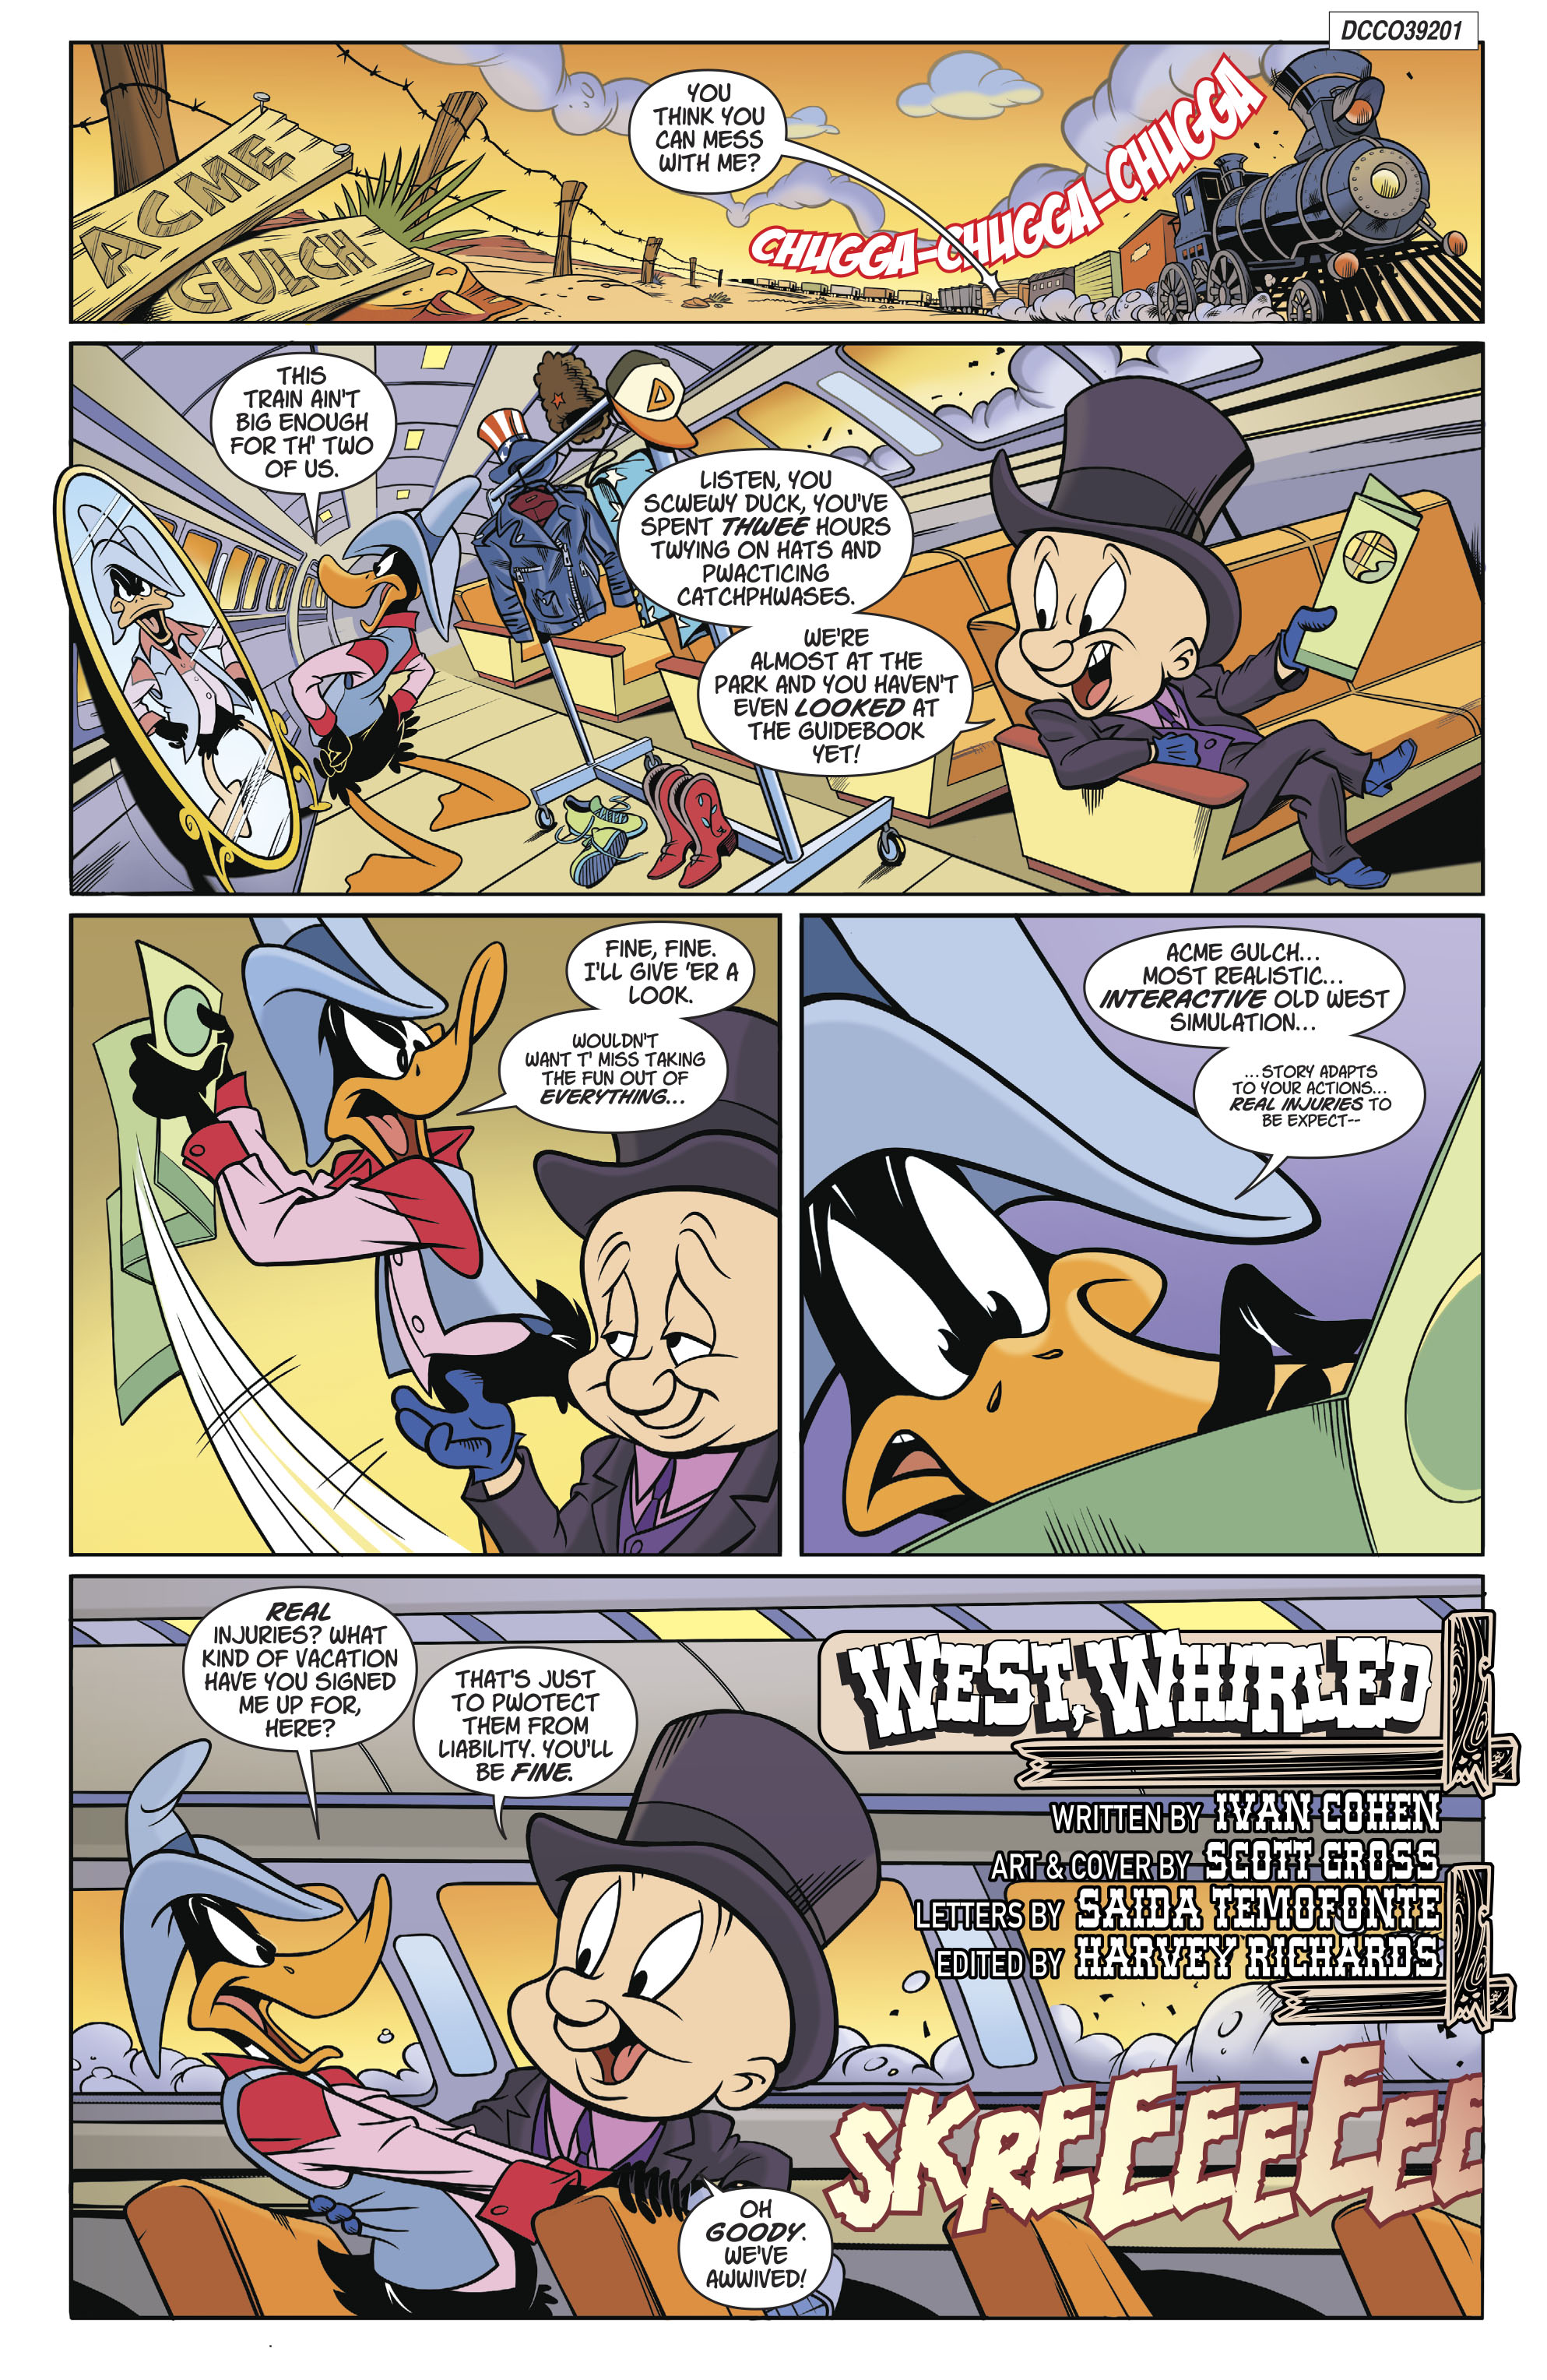 Looney Tunes (1994-): Chapter 243 - Page 2